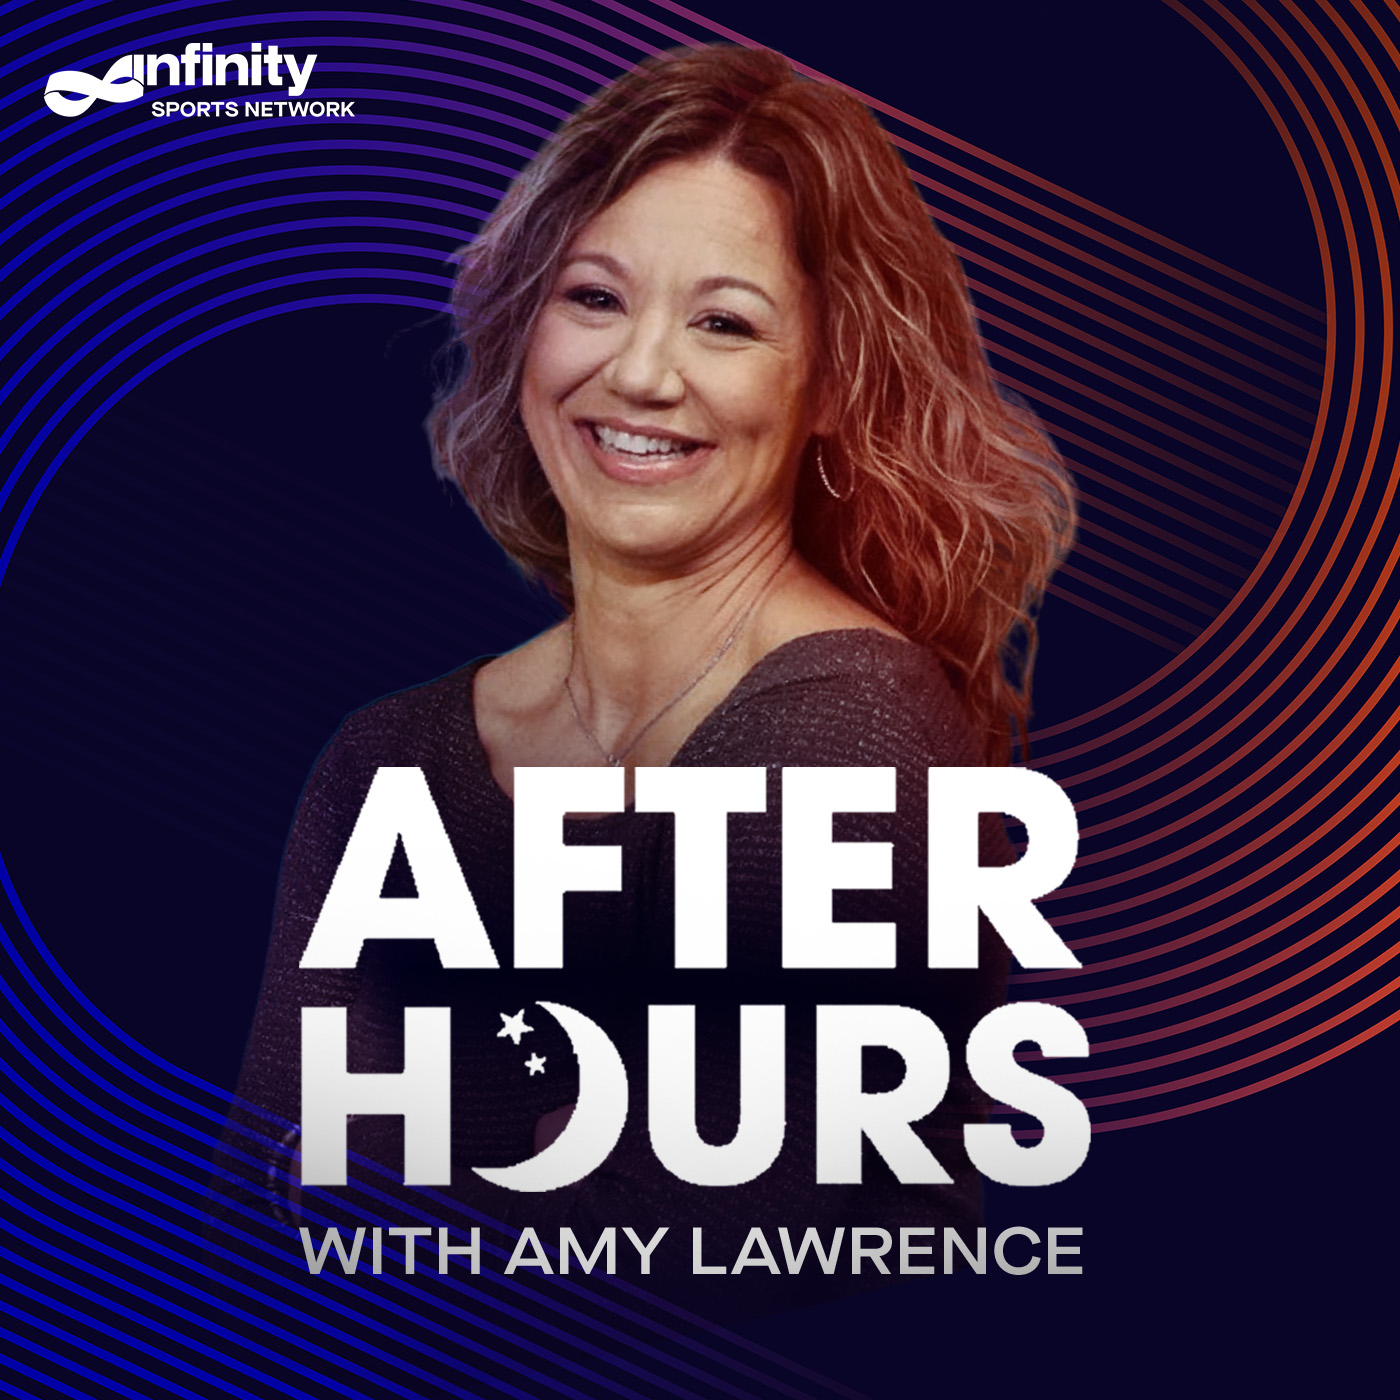 7/21/21 After Hours with Amy Lawrence PODCAST: Hour 3